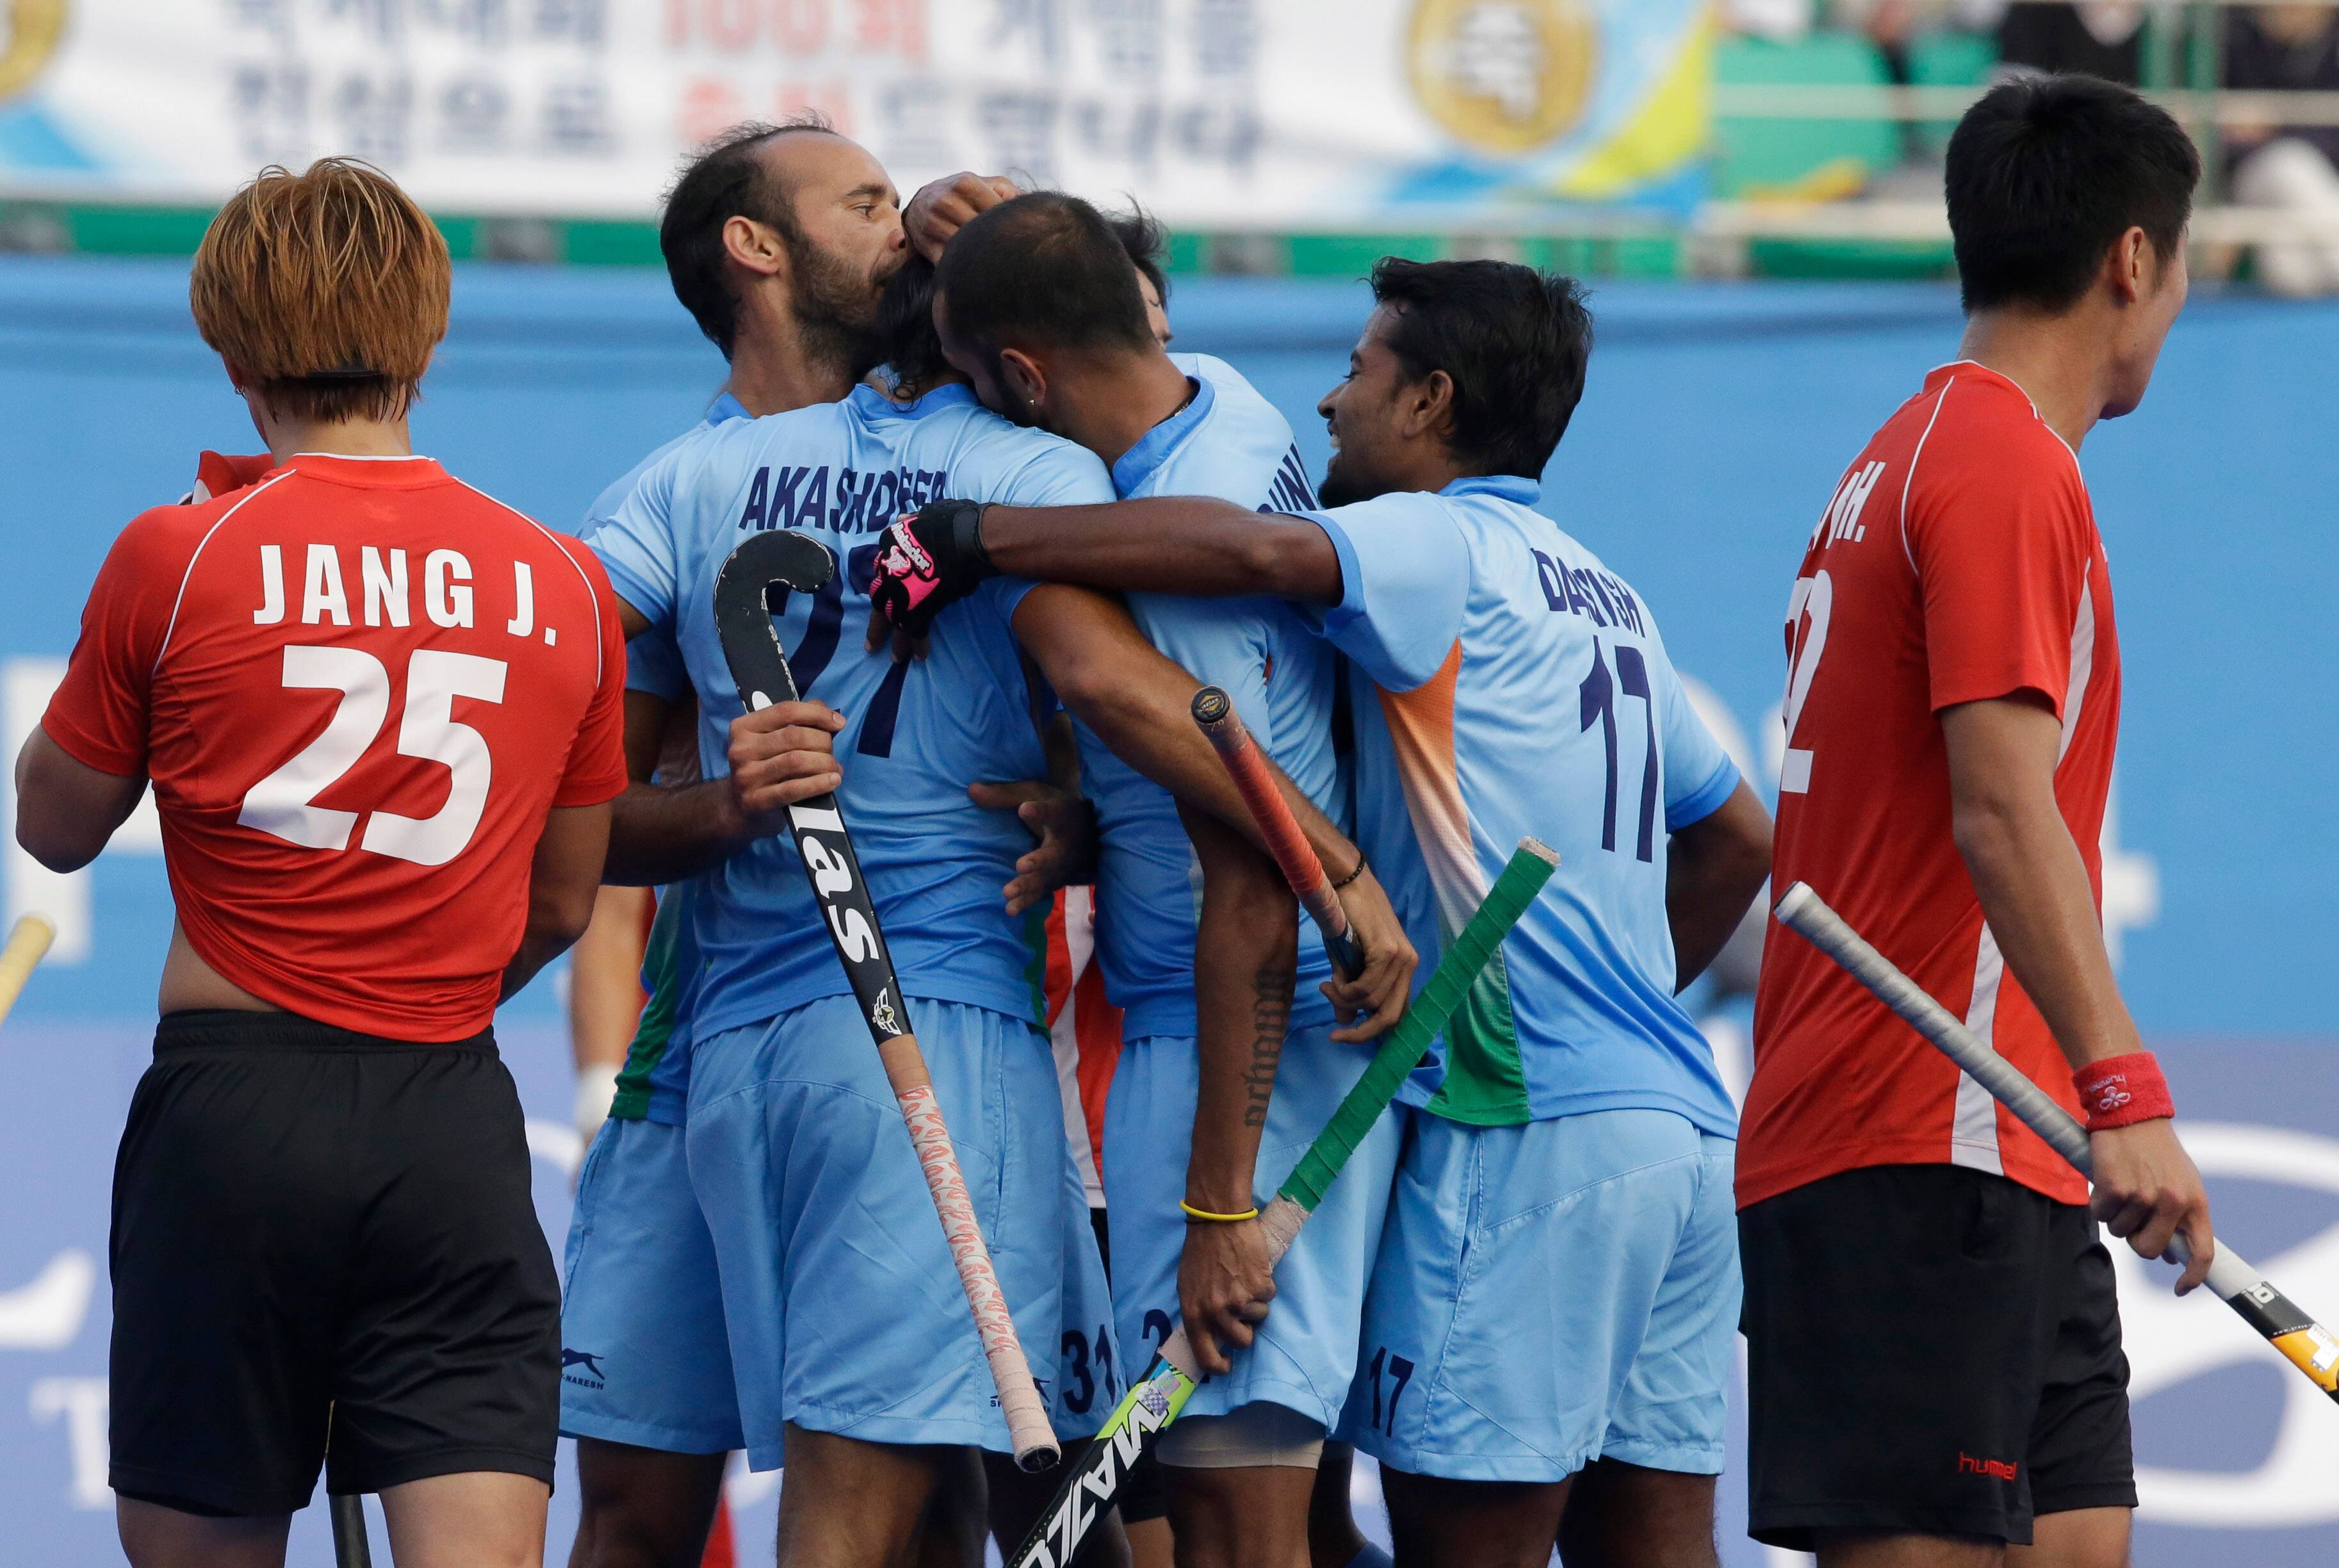 India to play Argentina in tournament opener of HWL Final